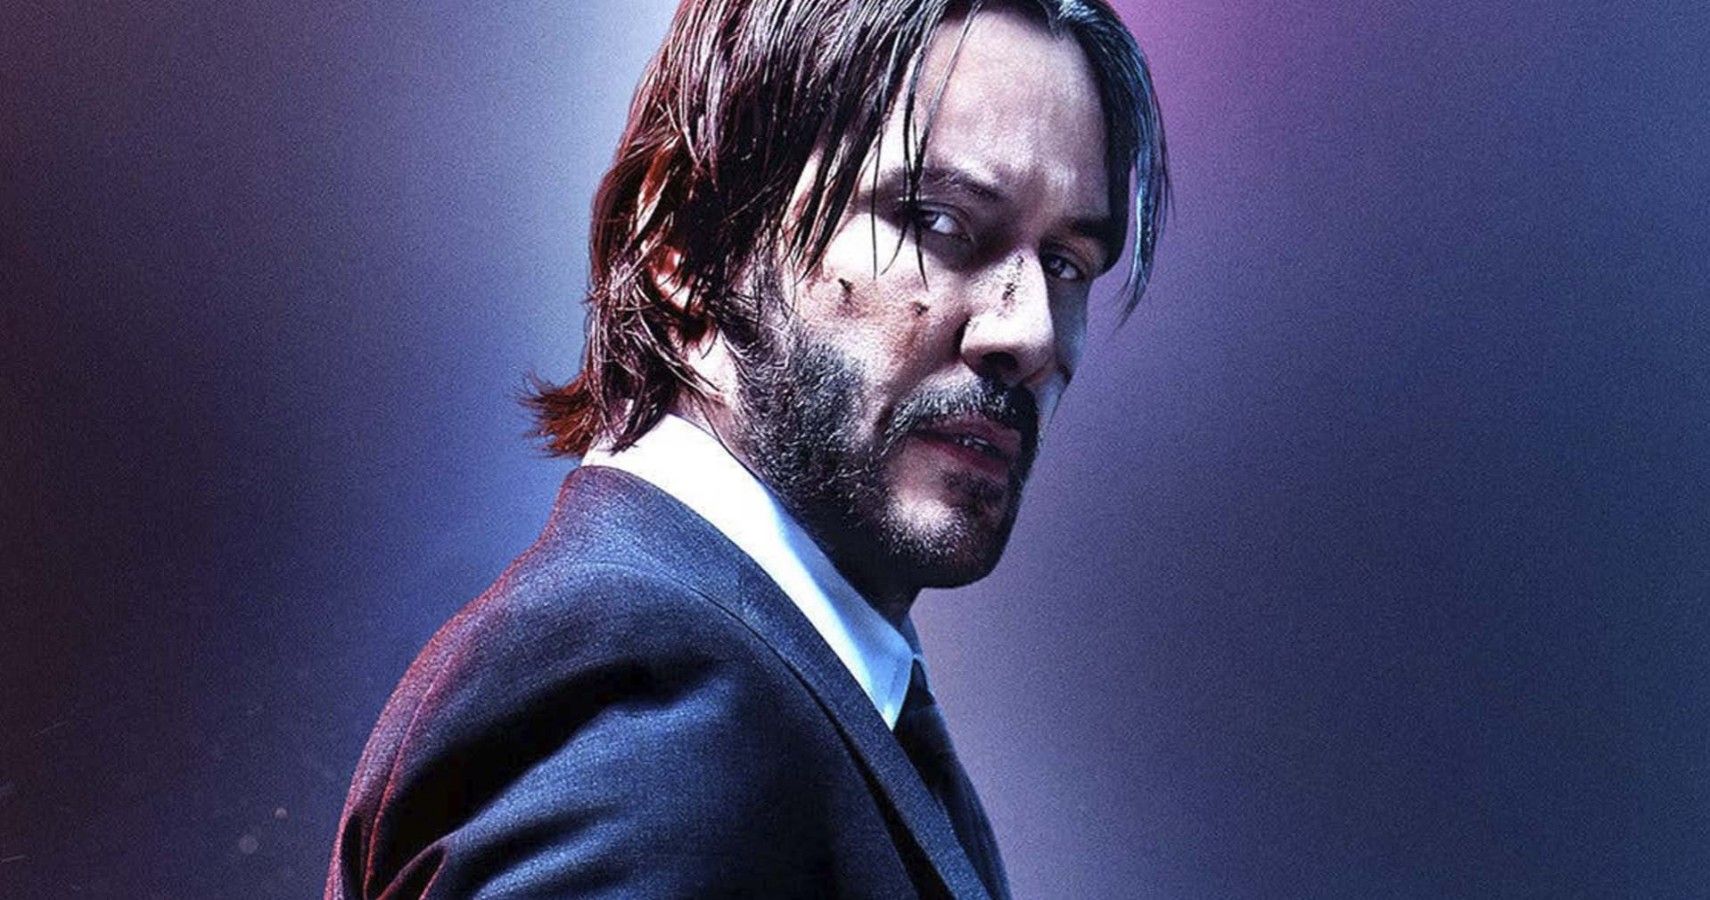 John Wick Hair Tutorial: Step-by-Step Guide for the Perfect Look - wide 7